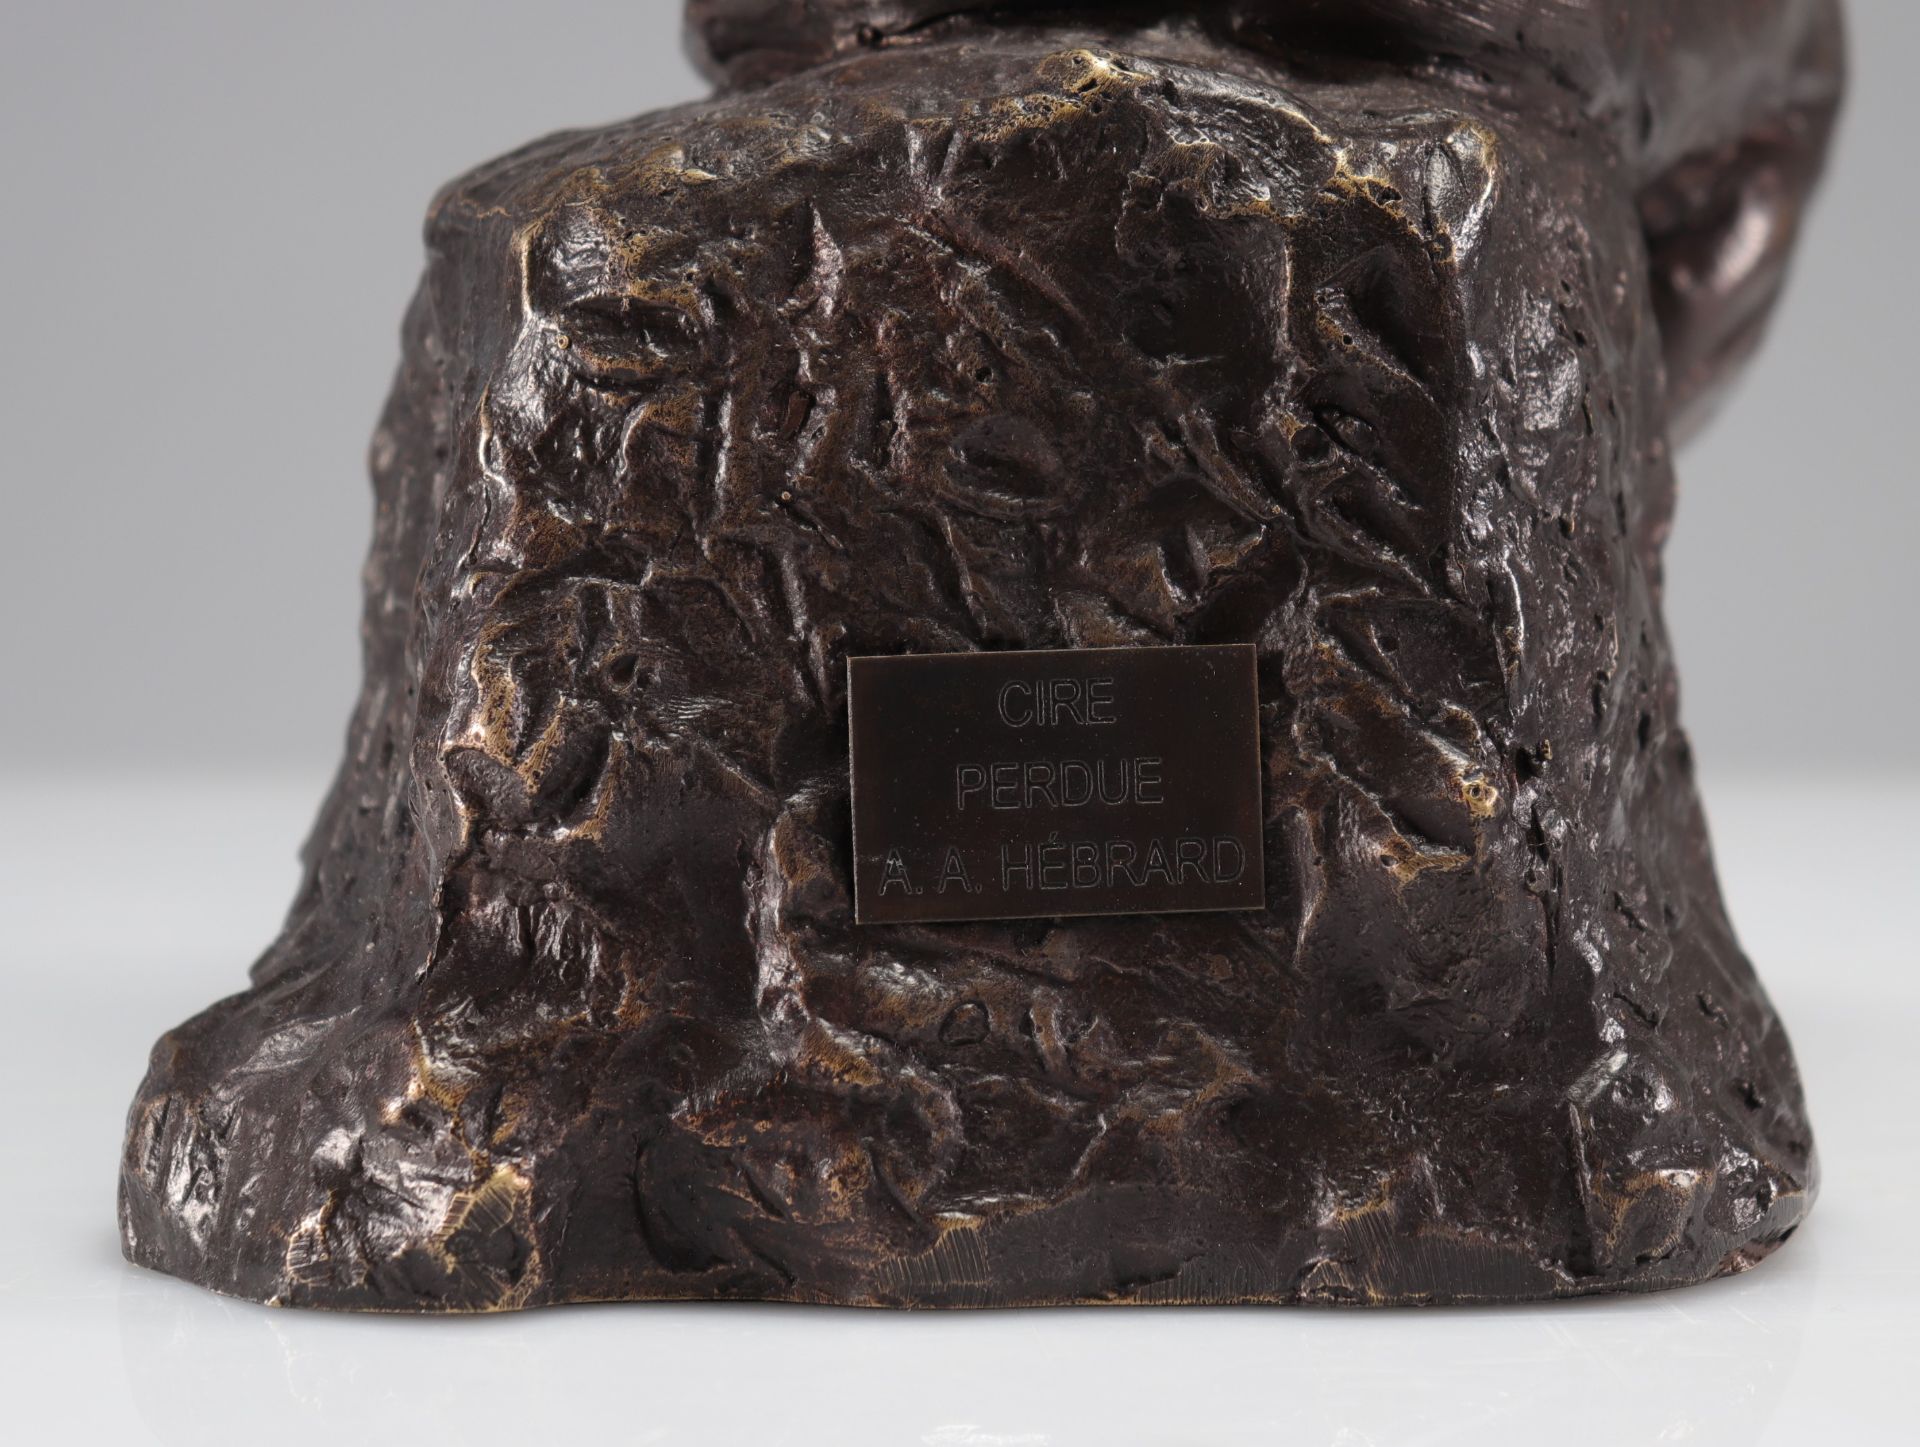 Auguste Rodin (After). " The Thinker ". Lost wax bronze with brown patina. Signed "Rodin" hollow. Be - Image 5 of 6